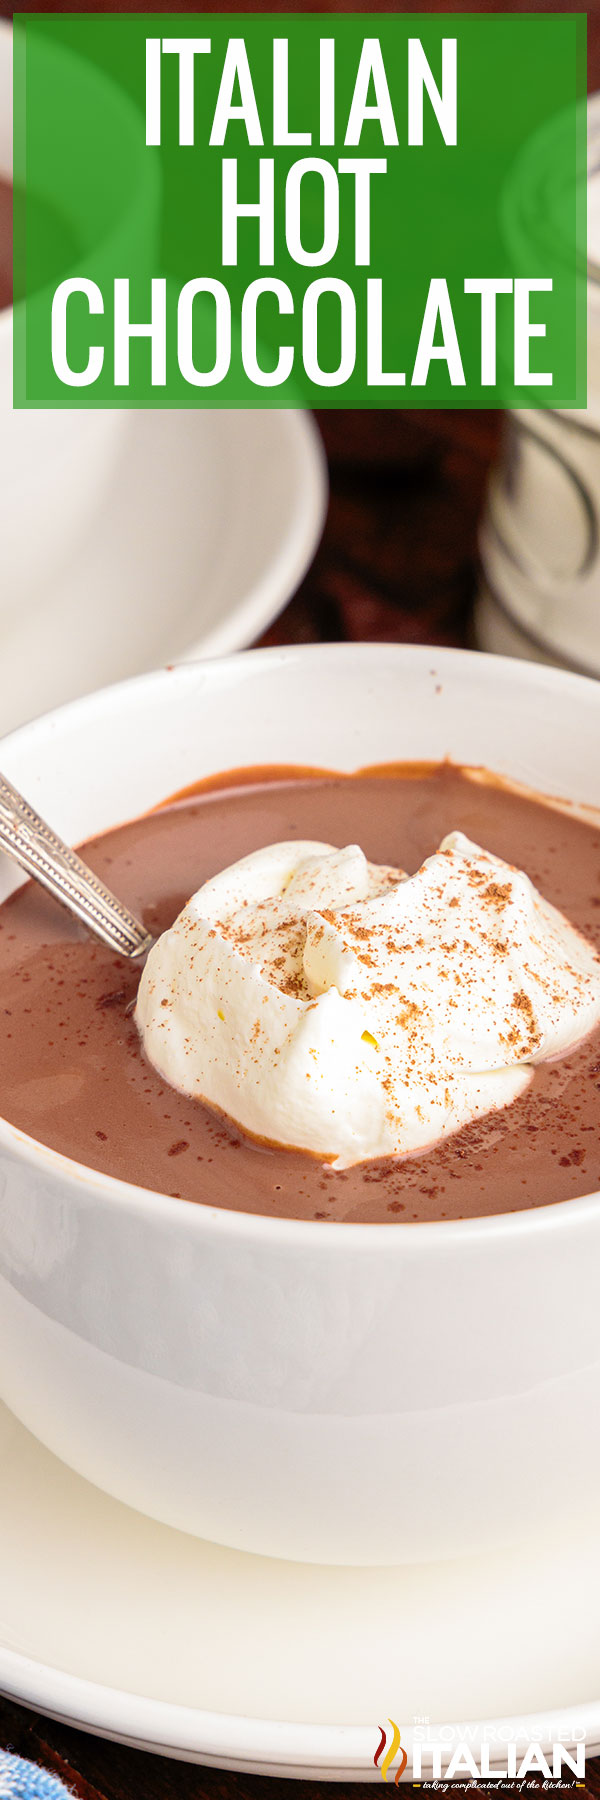 titled image (and shown): Italian hot chocolate